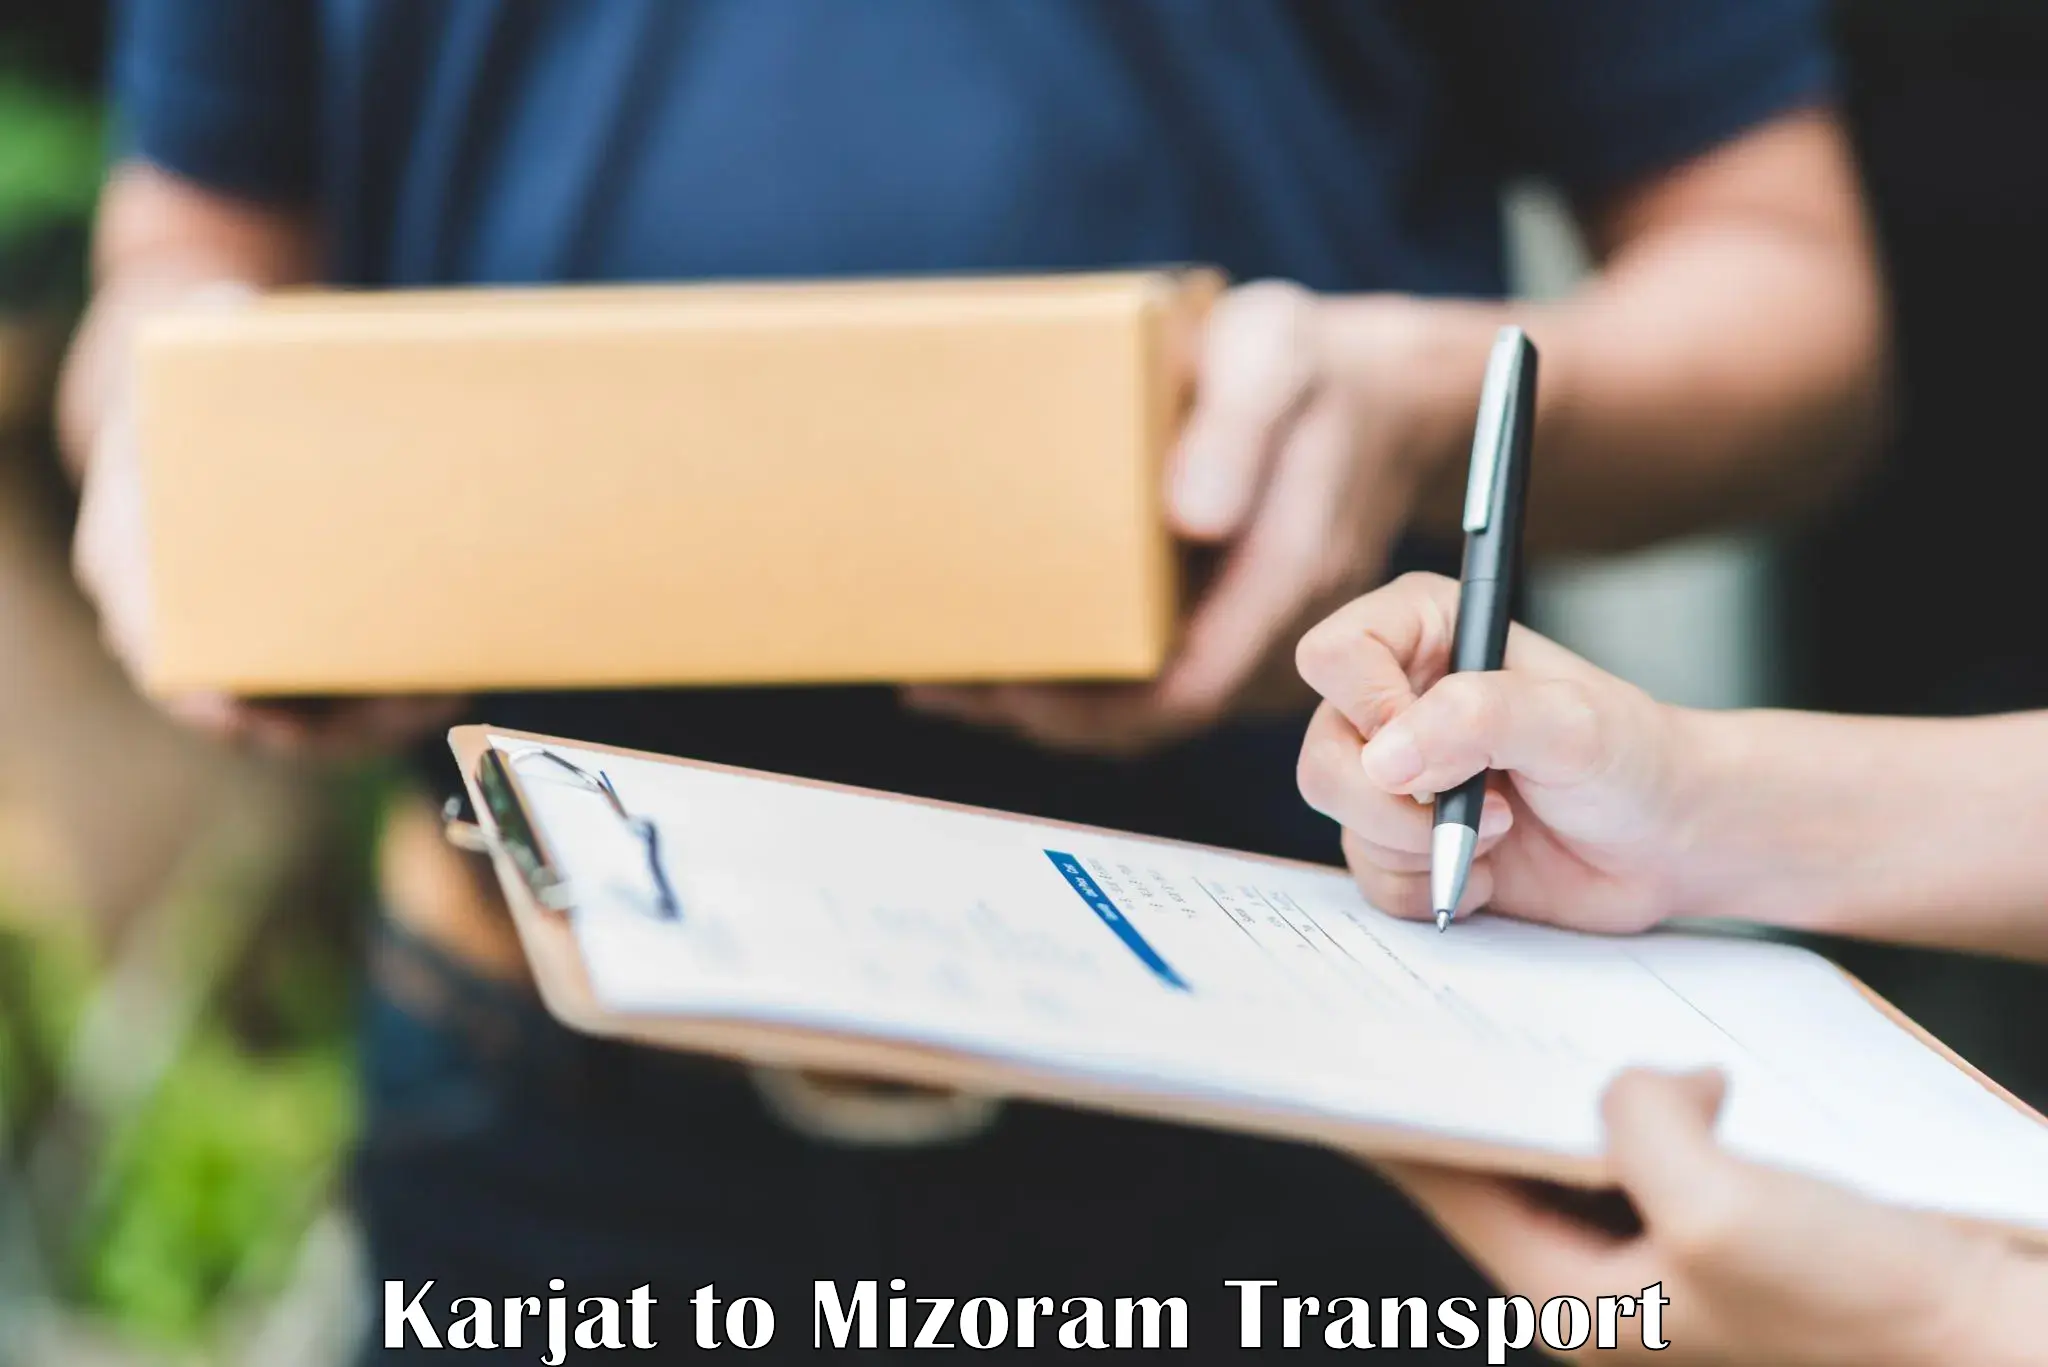 Transport bike from one state to another Karjat to Mizoram